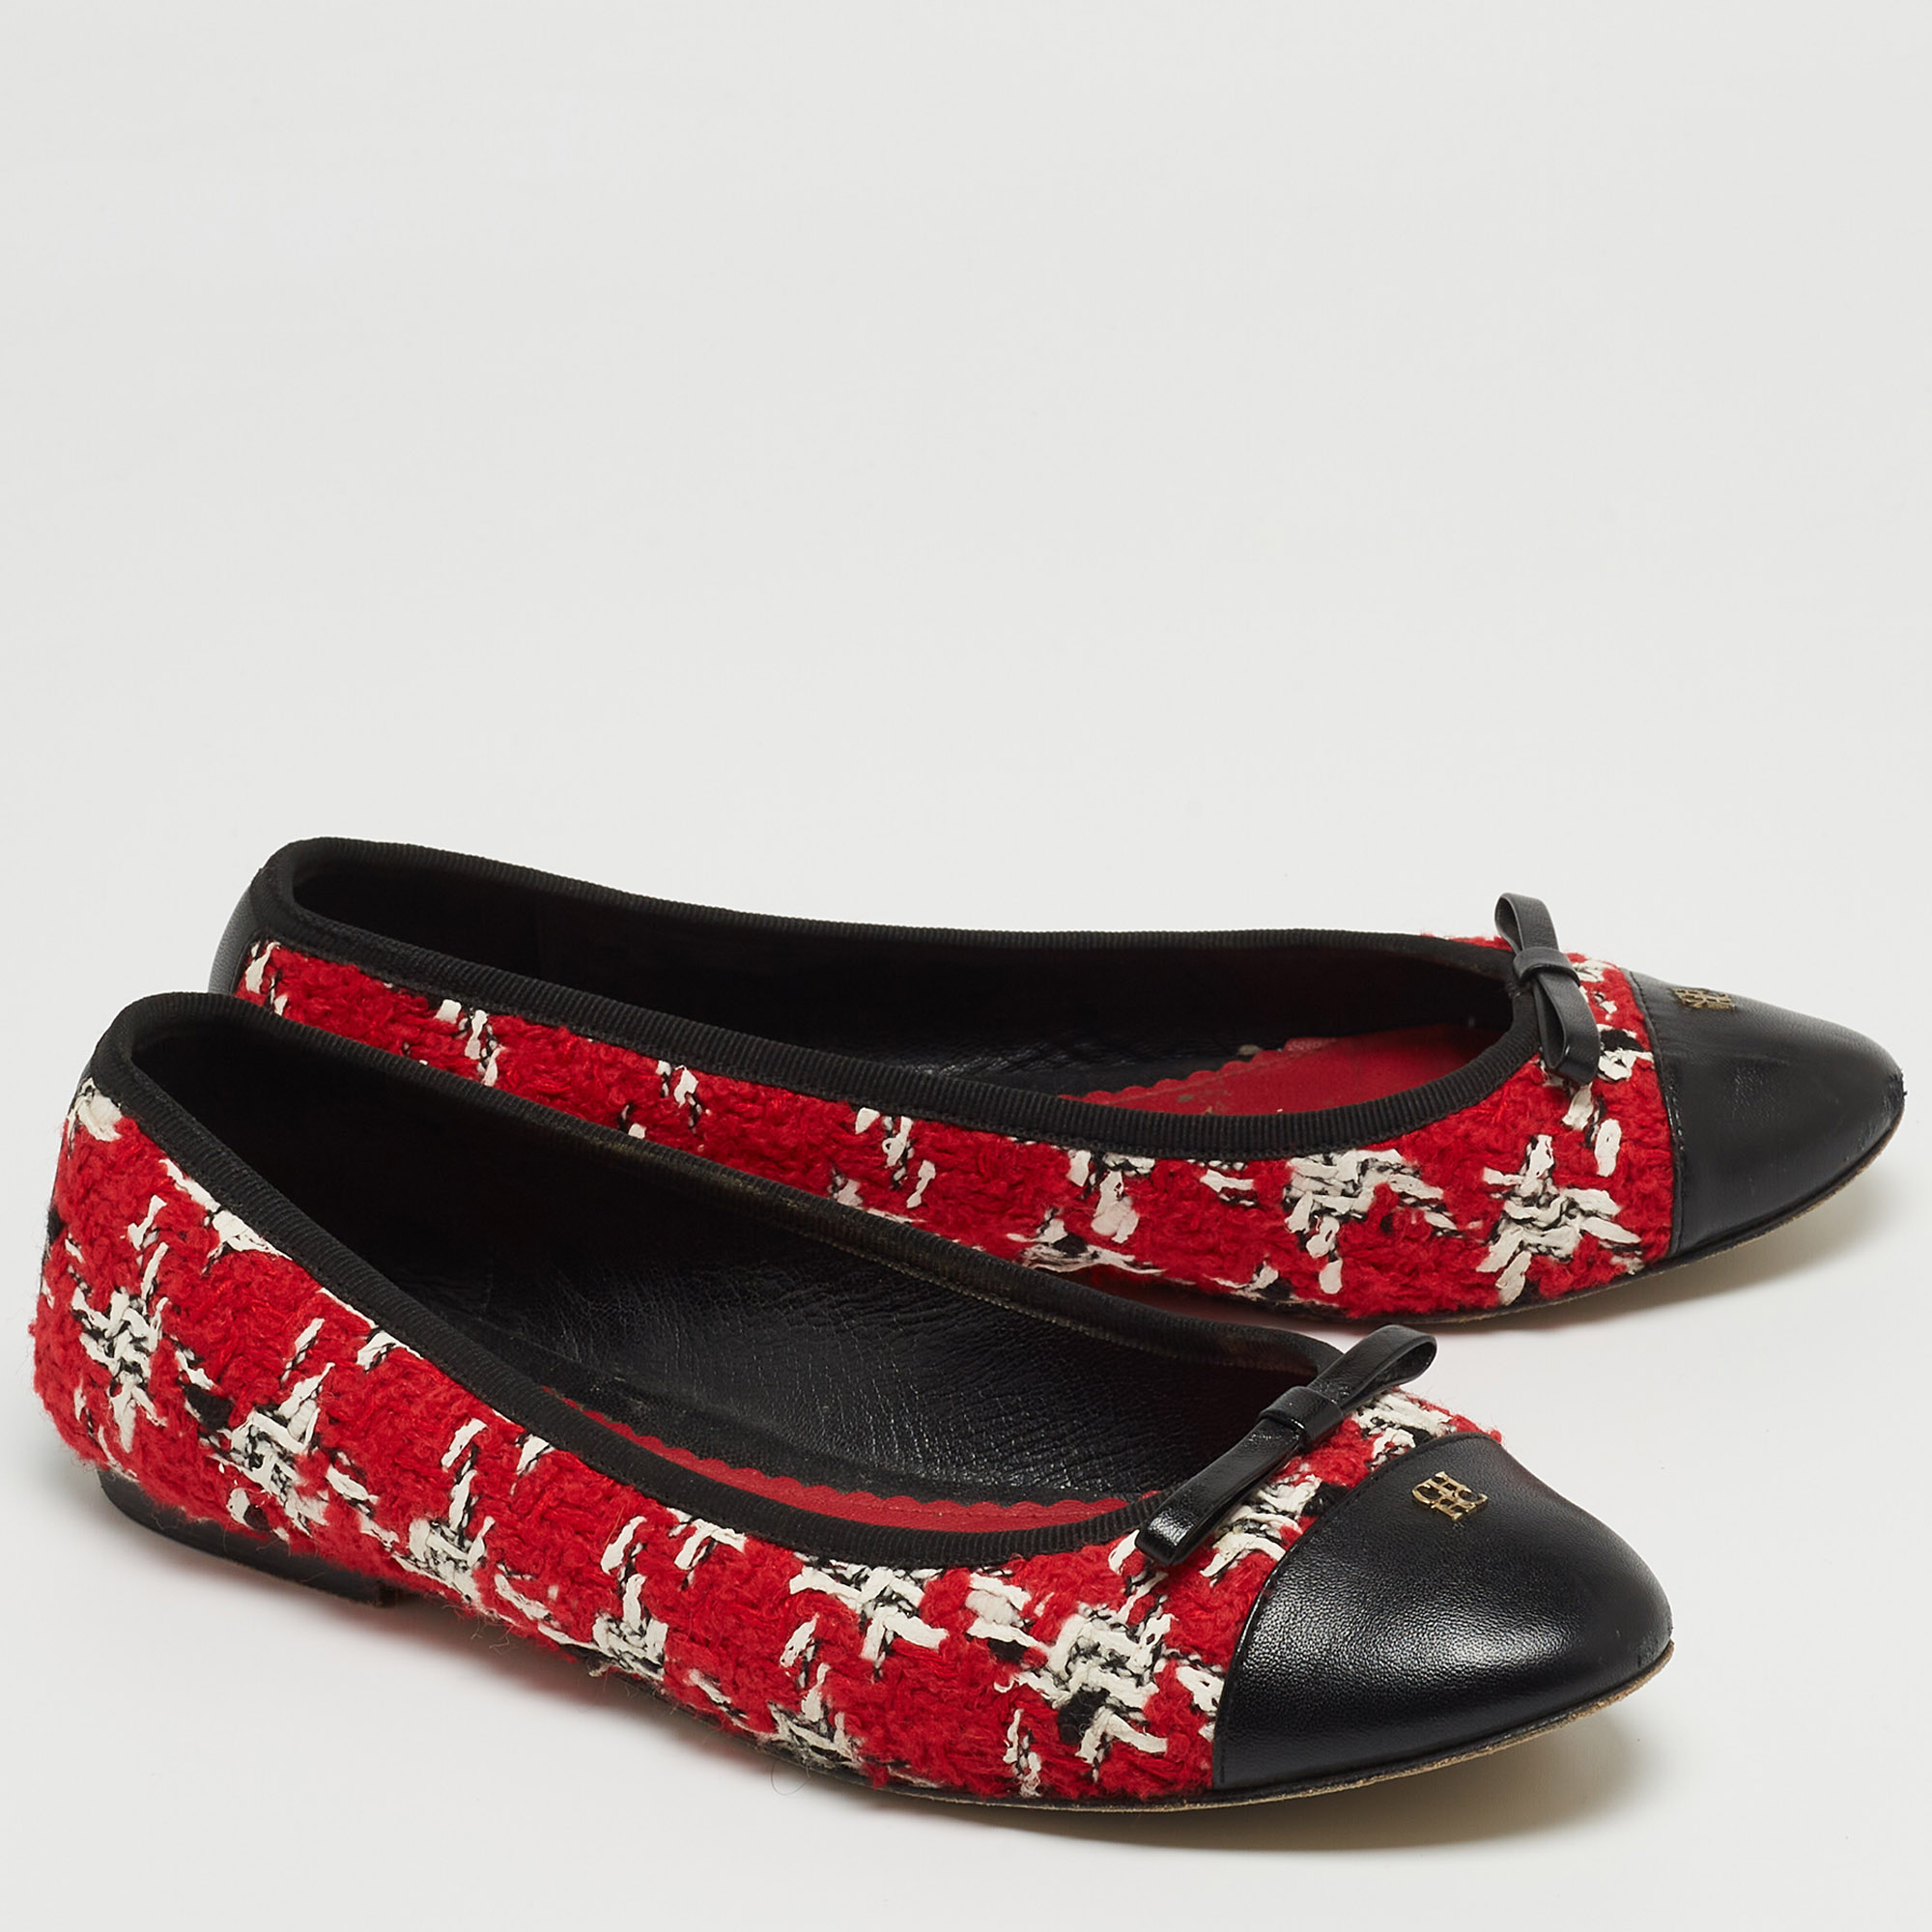 CH Carolina Herrera Multicolor Tweed And Leather Bow Ballet Flats Size 40